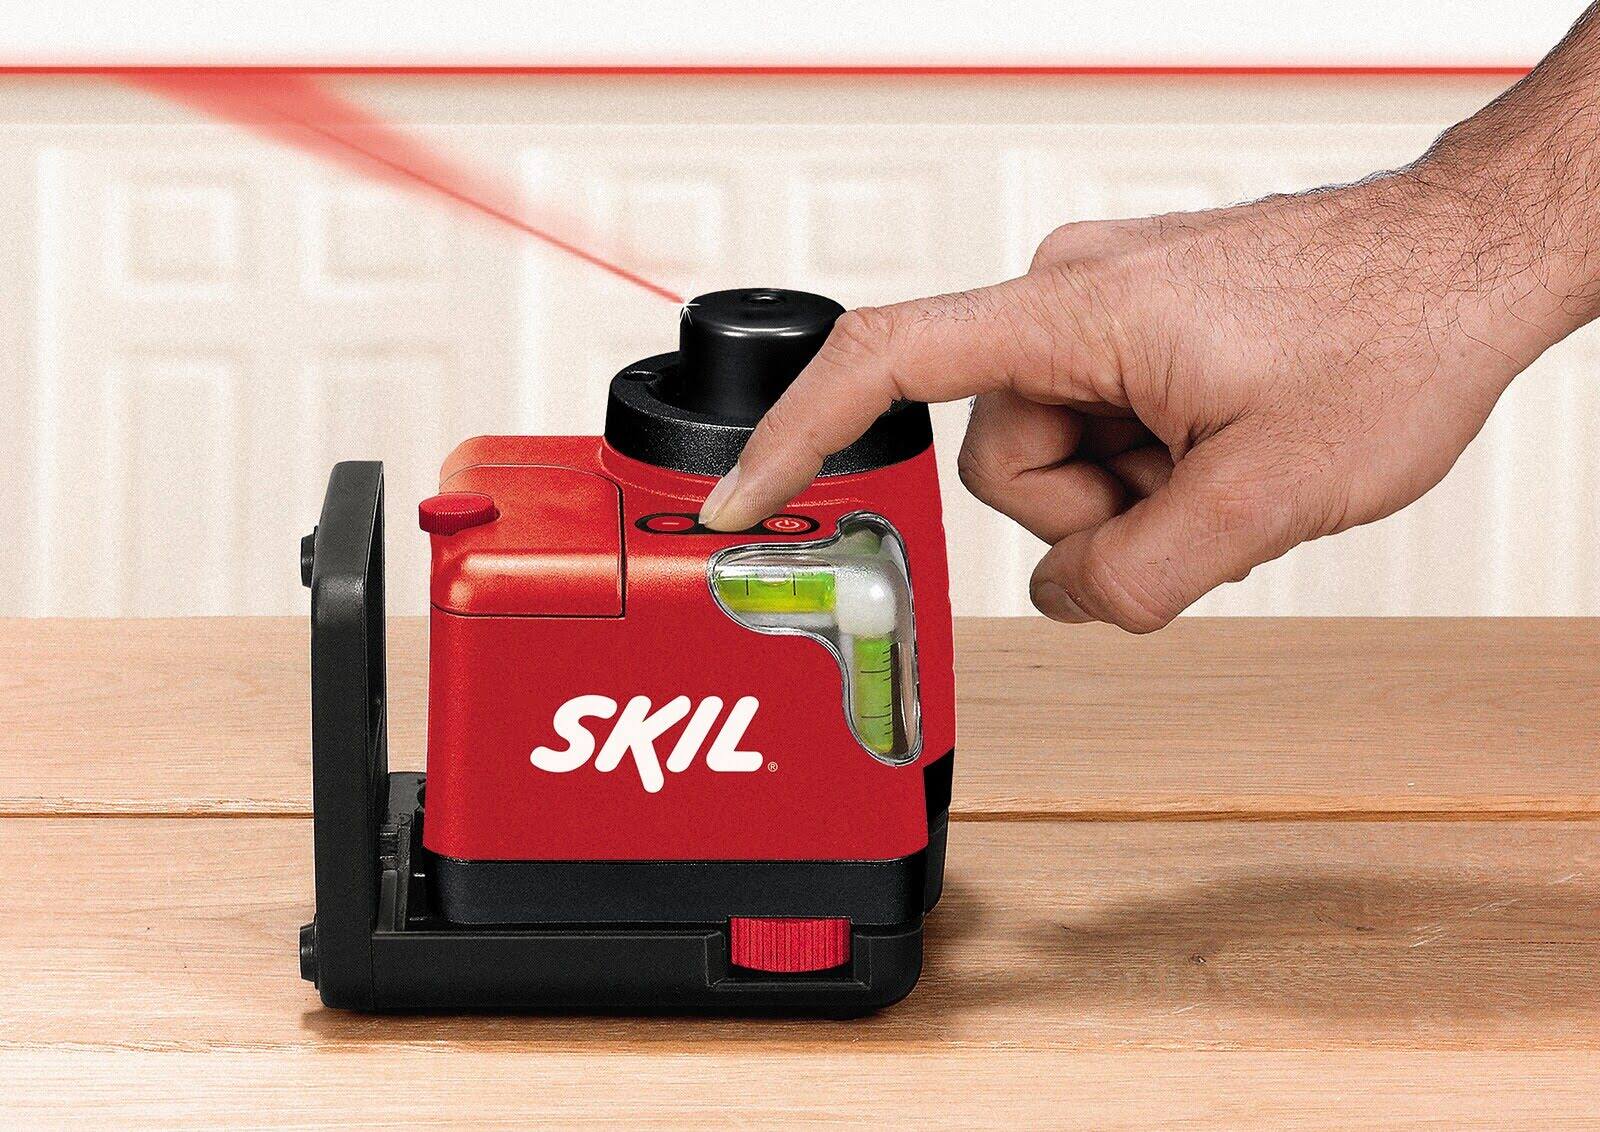 What Is The Red Paper That Comes With The Skil Laser Level Used For